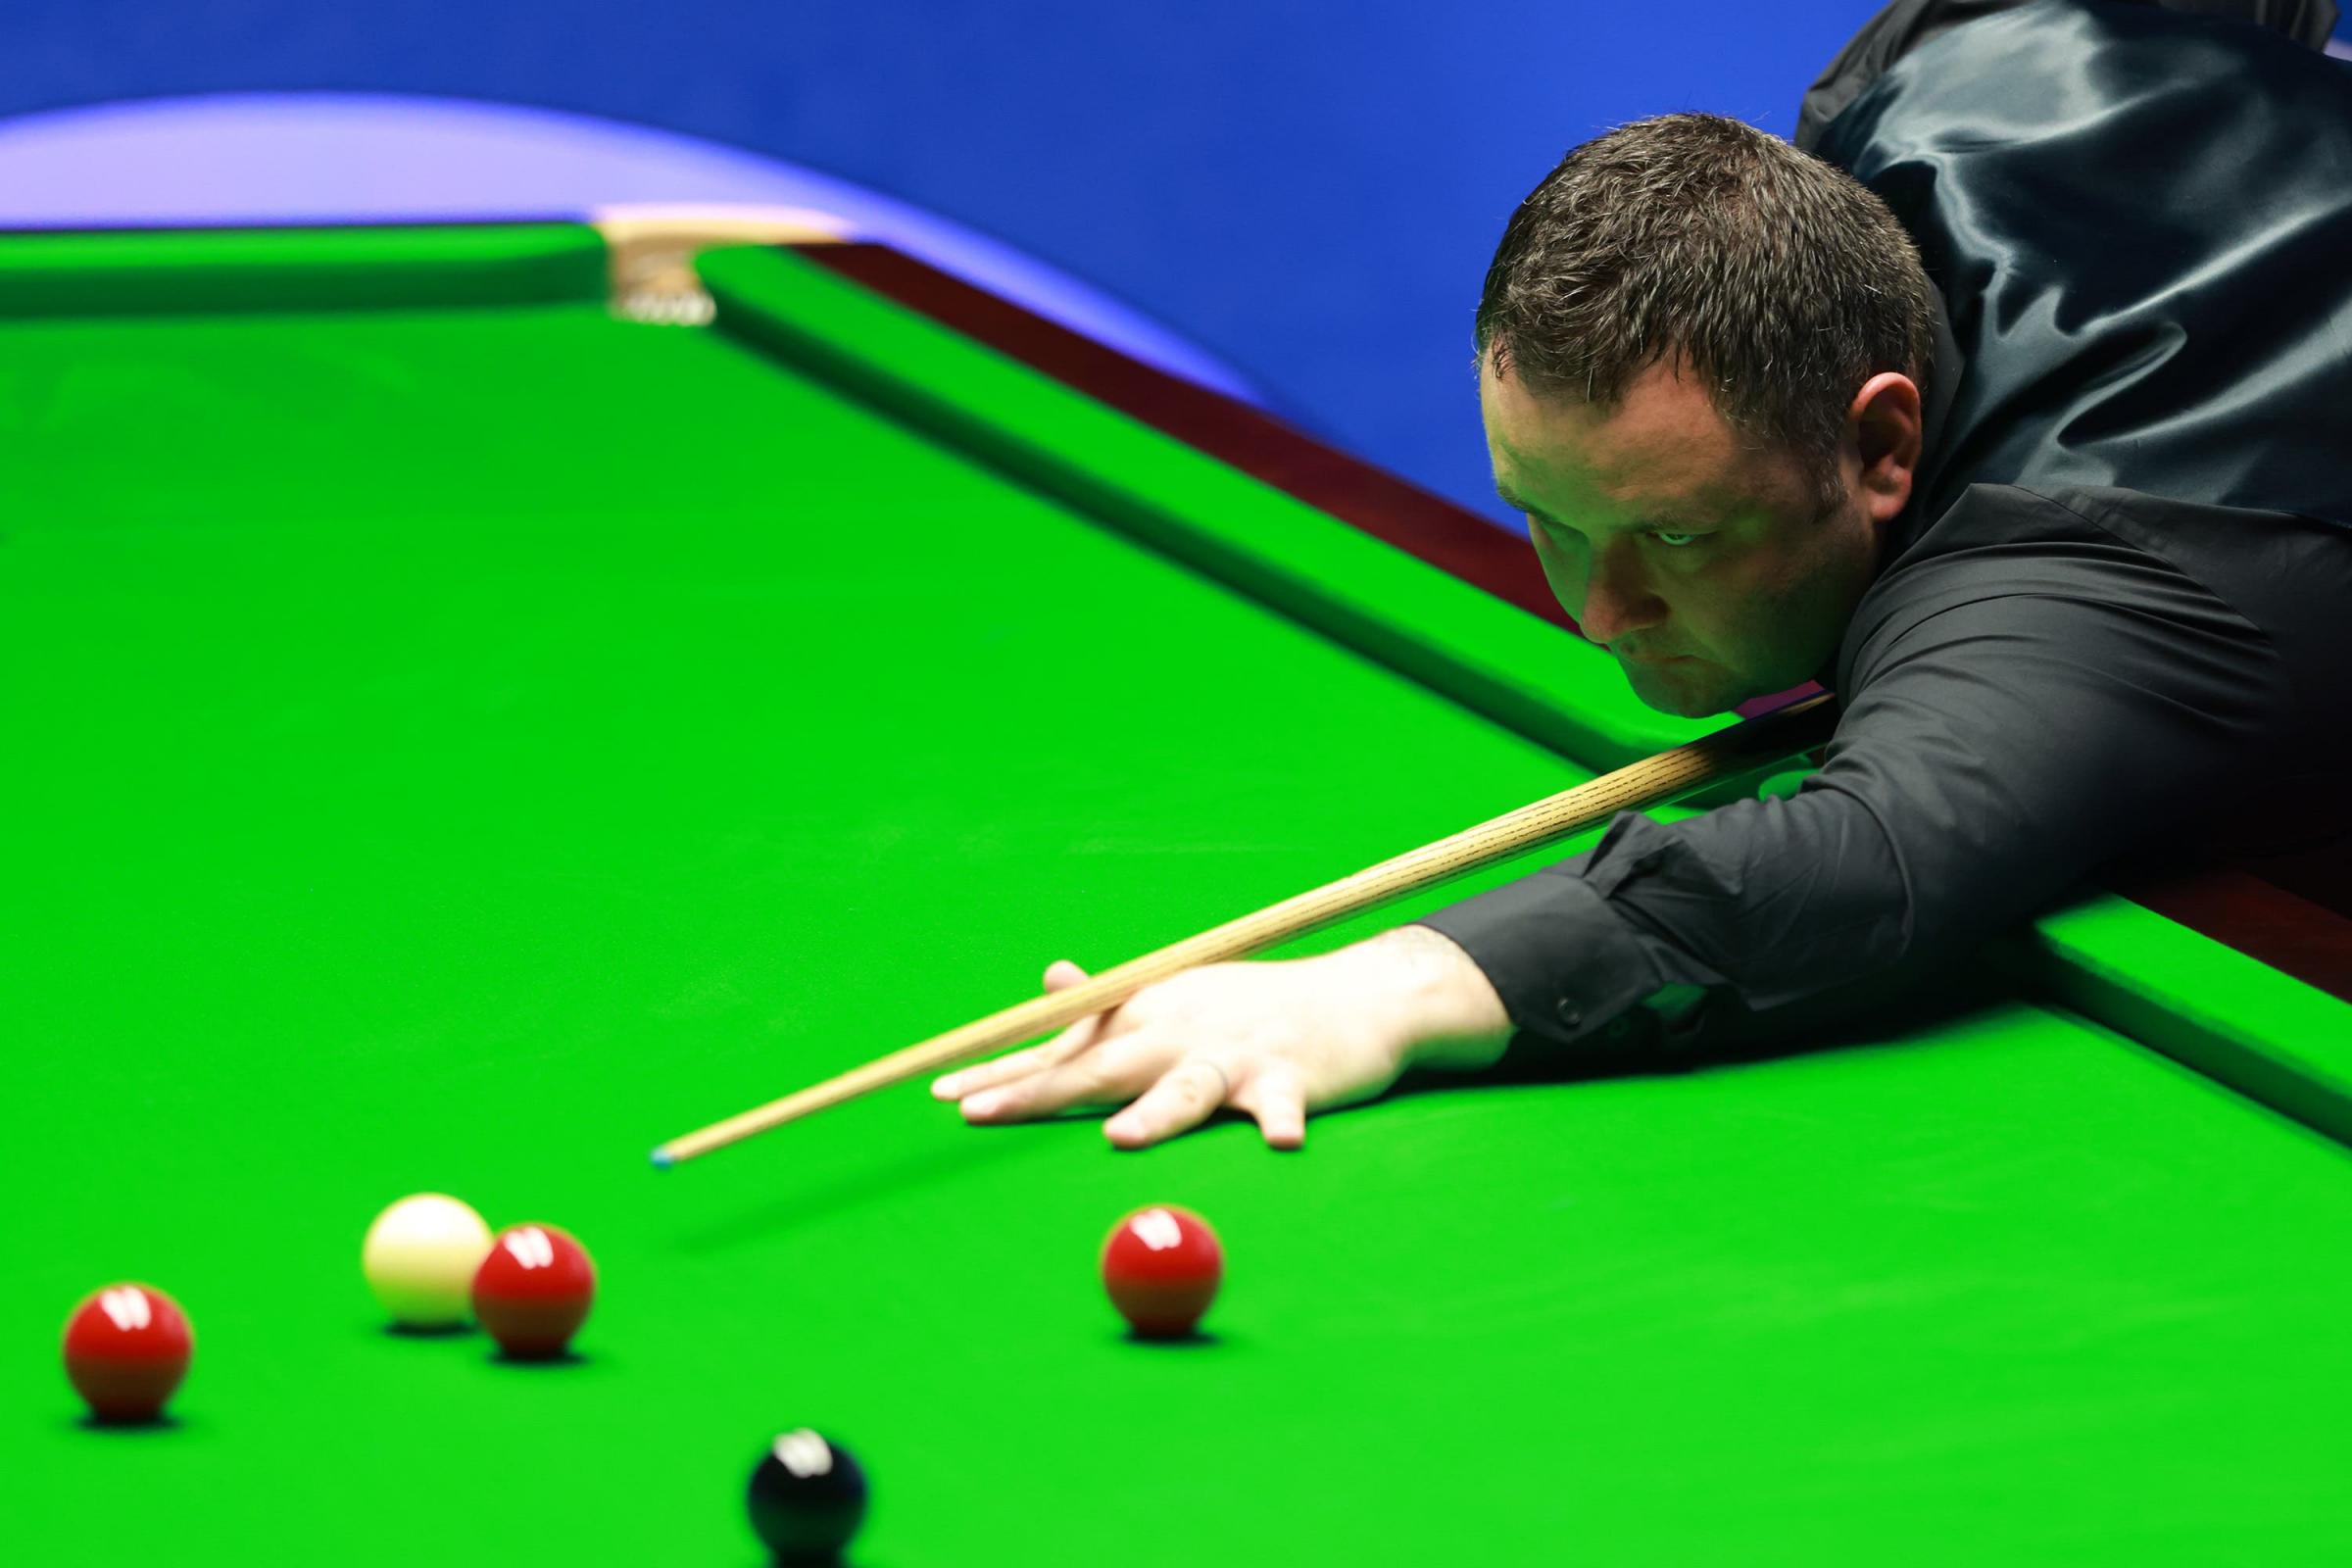 Stephen Maguire holds off Zhao Xintong fightback to seal quarter-final spot The Oldham Times